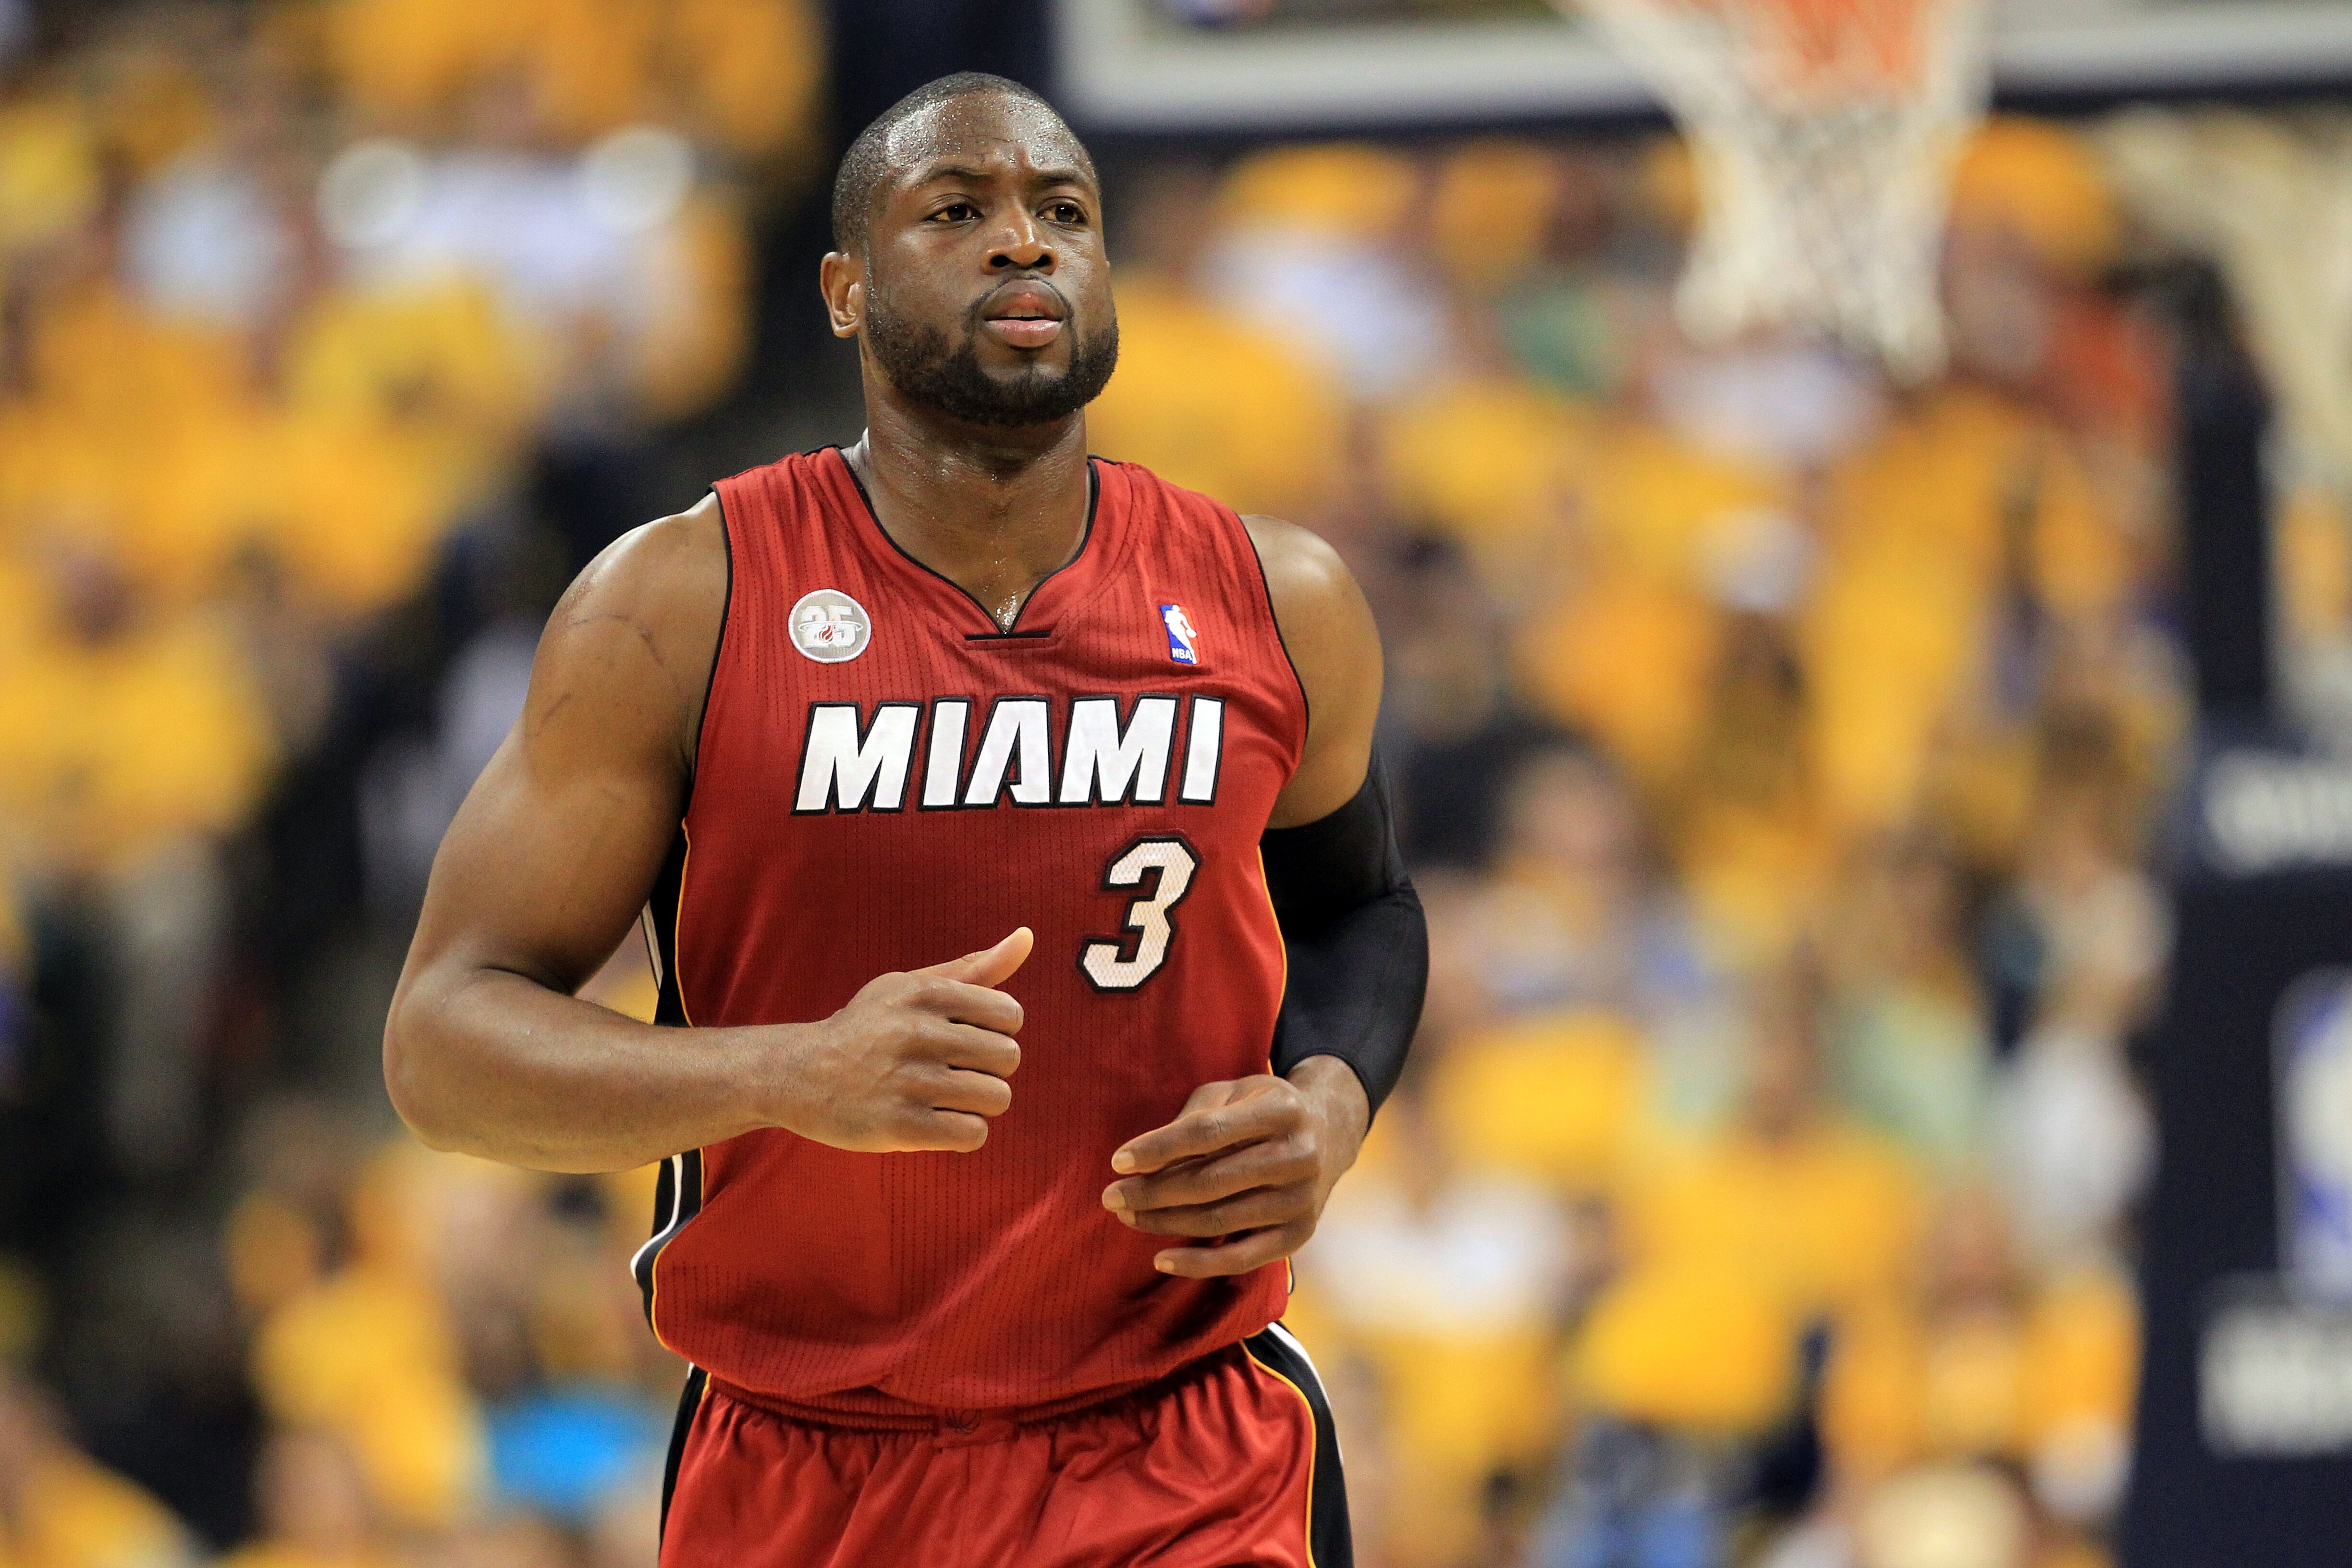 Dwyane Wade at a Miami Heat game | Source: Getty Images/GlobalImagesUkraine